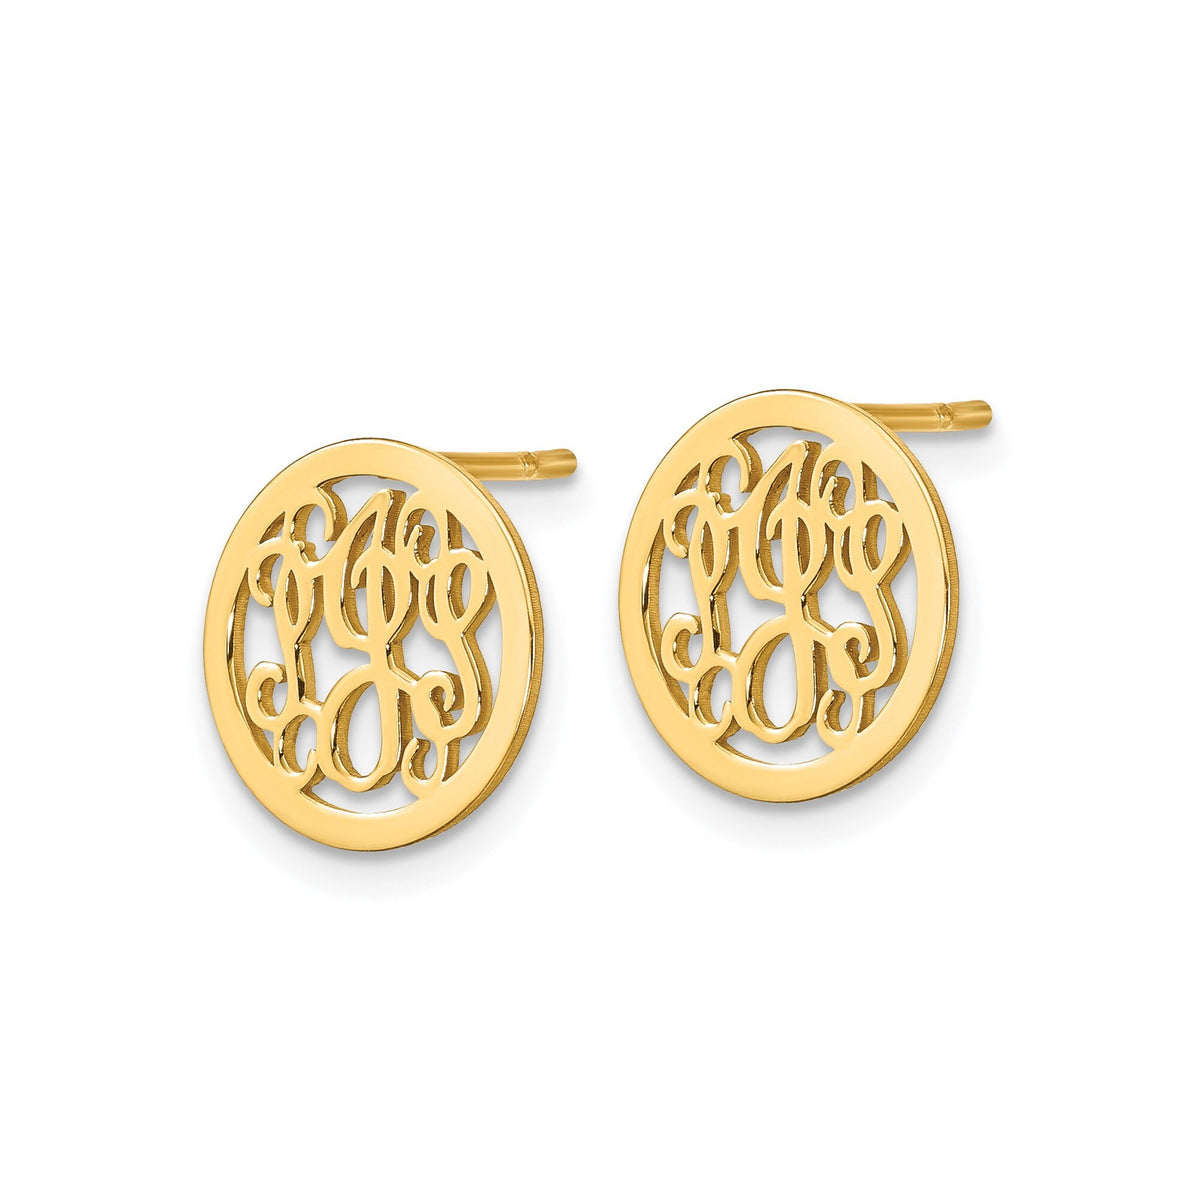 Personalized Monogram Circle Post Earrings Available in Sterling Silver Gold Plated Silver & 14k Gold - Gift Box Included Made in USA